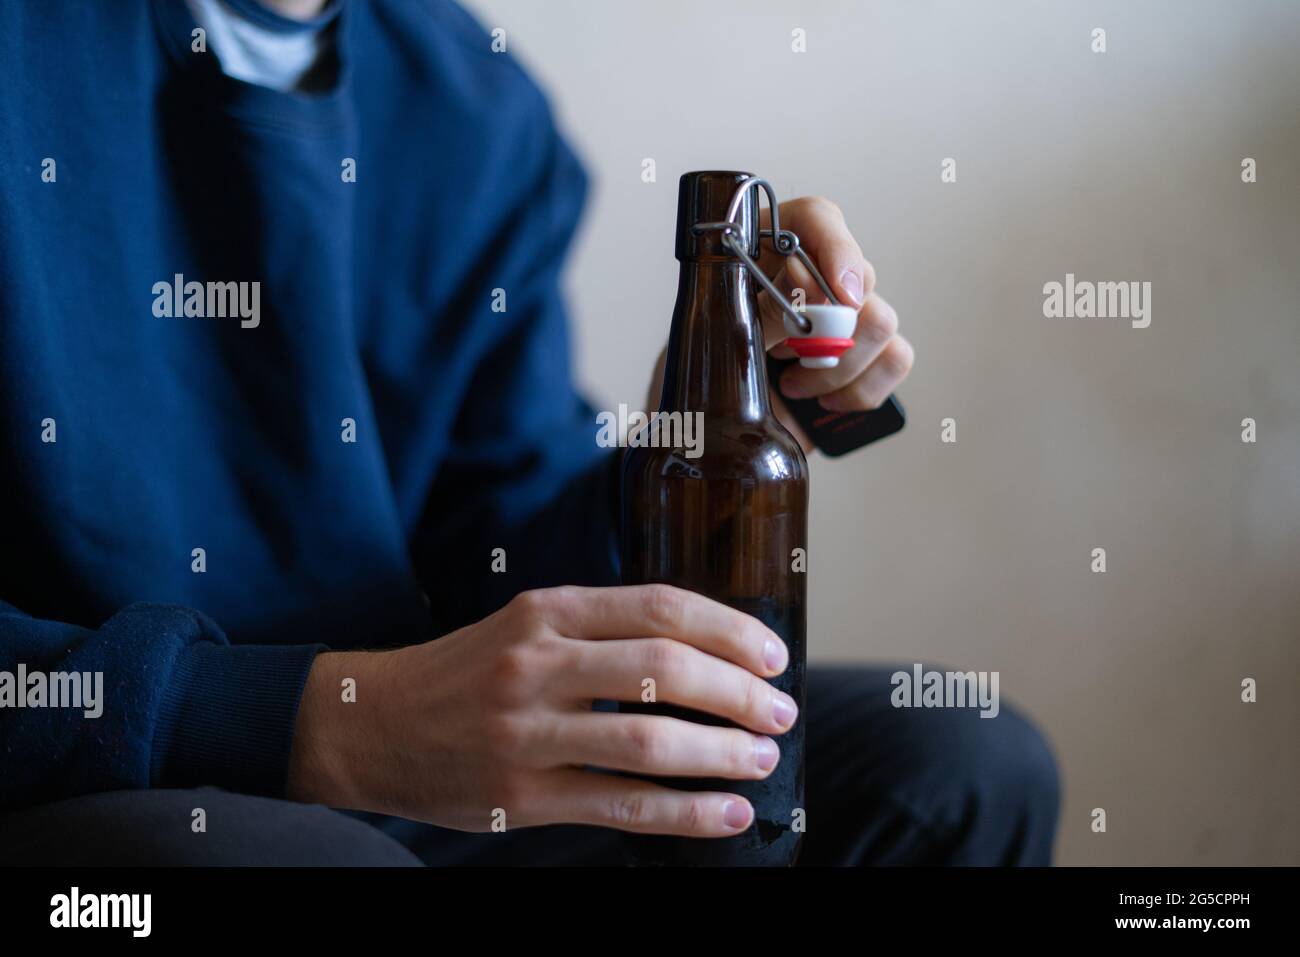 the man holding the glass bottle of alcohol sitting at home in depression, bad habit problem Stock Photo